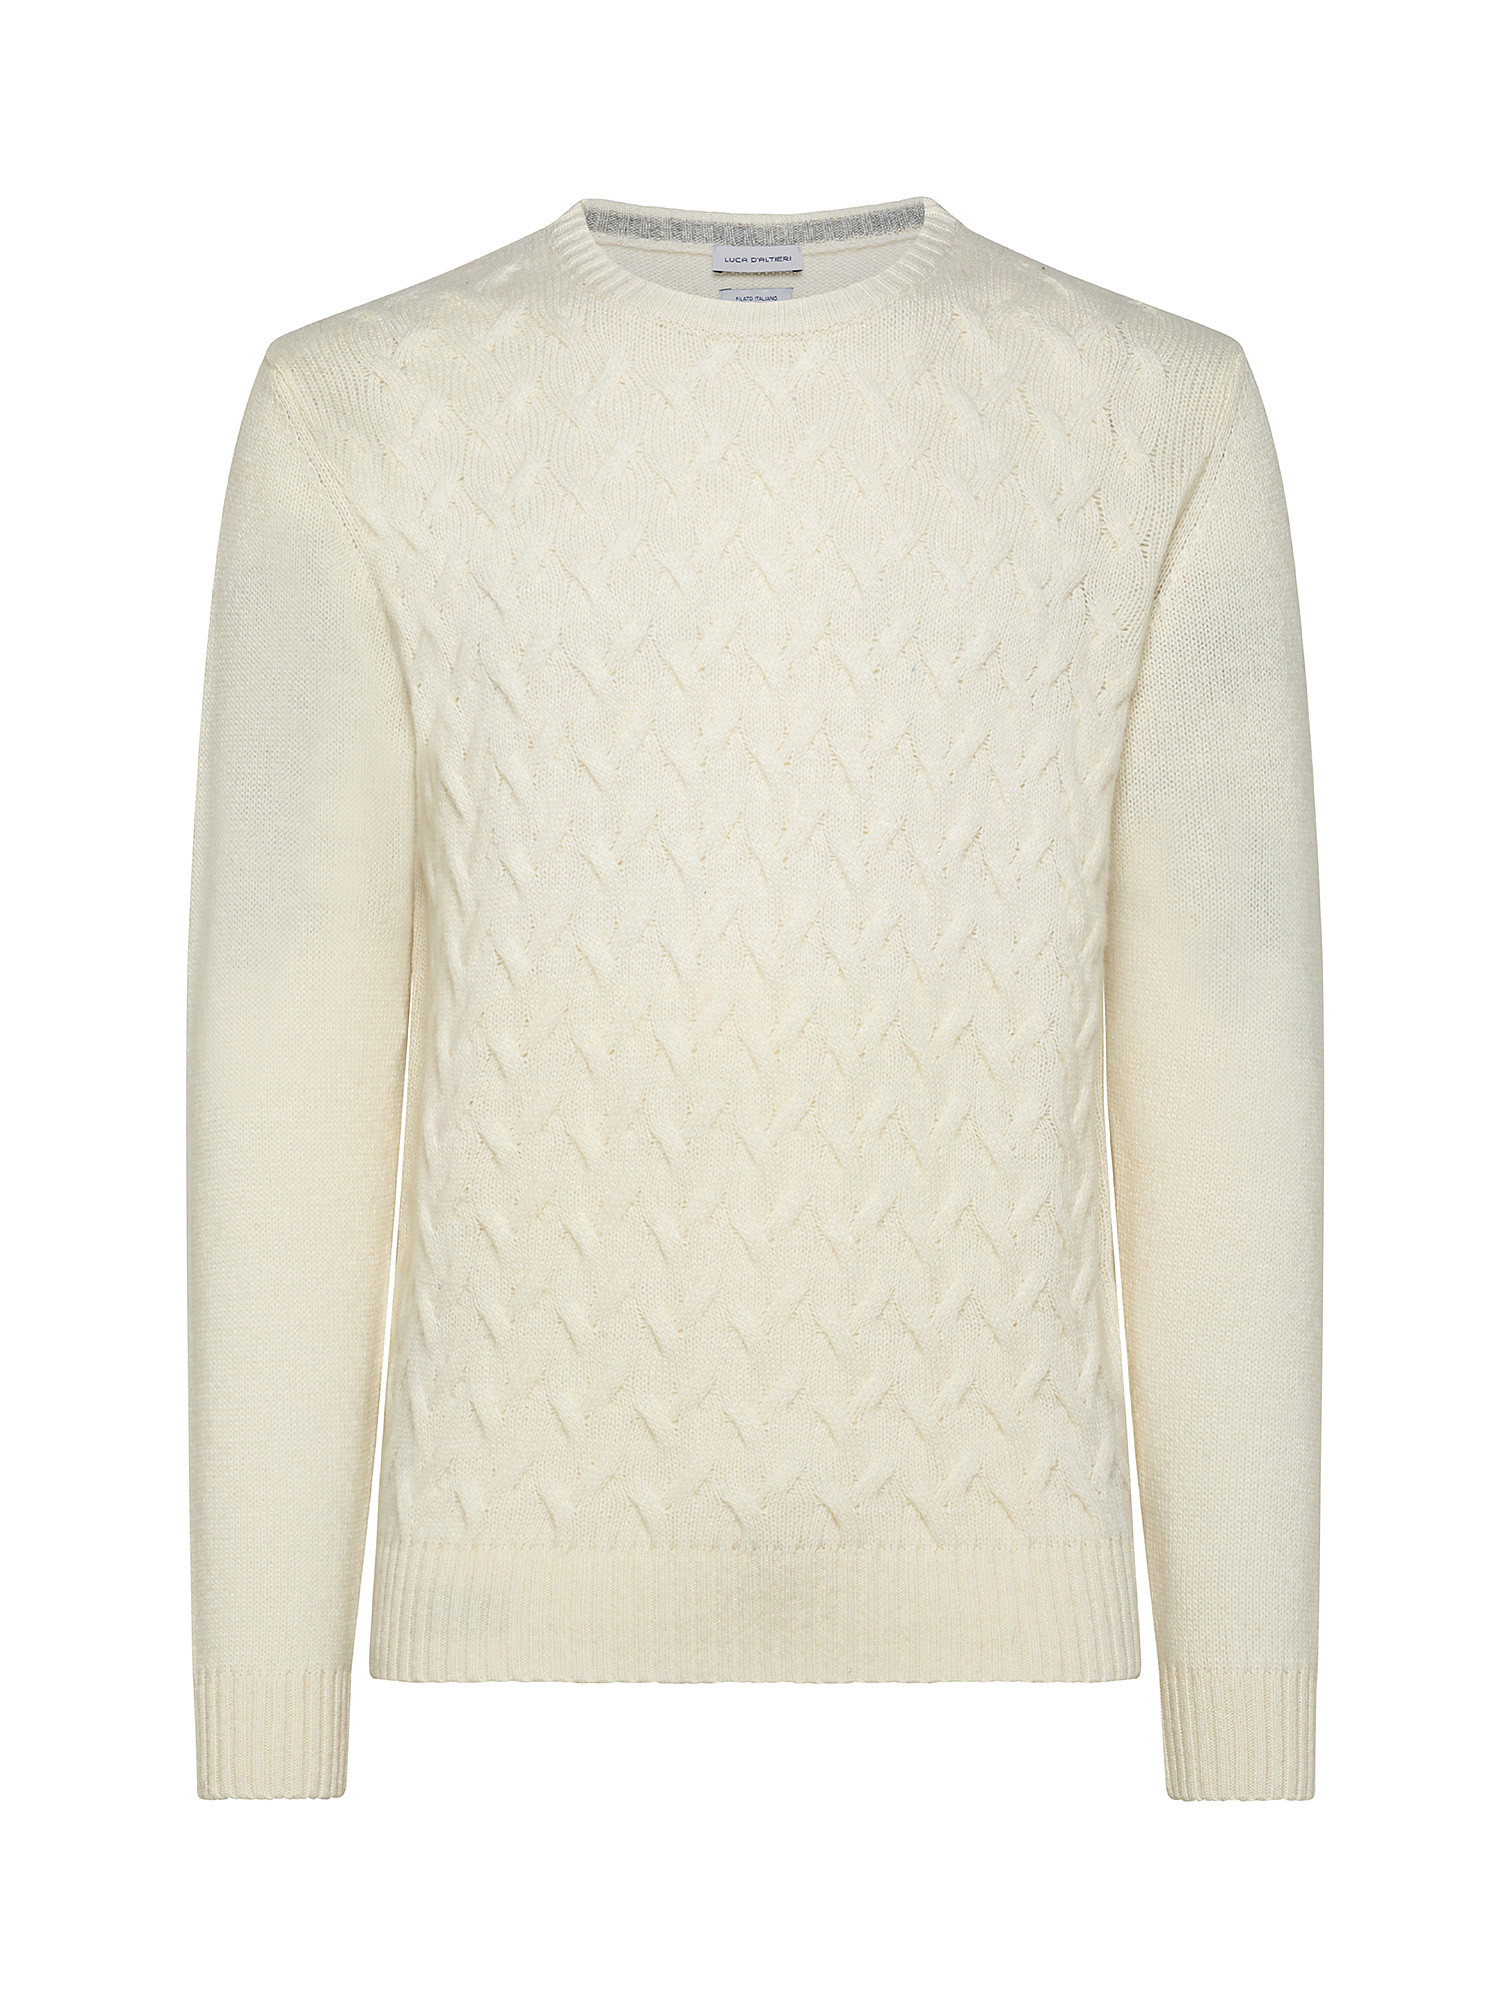 Crewneck sweater with noble fibers, White Cream, large image number 0